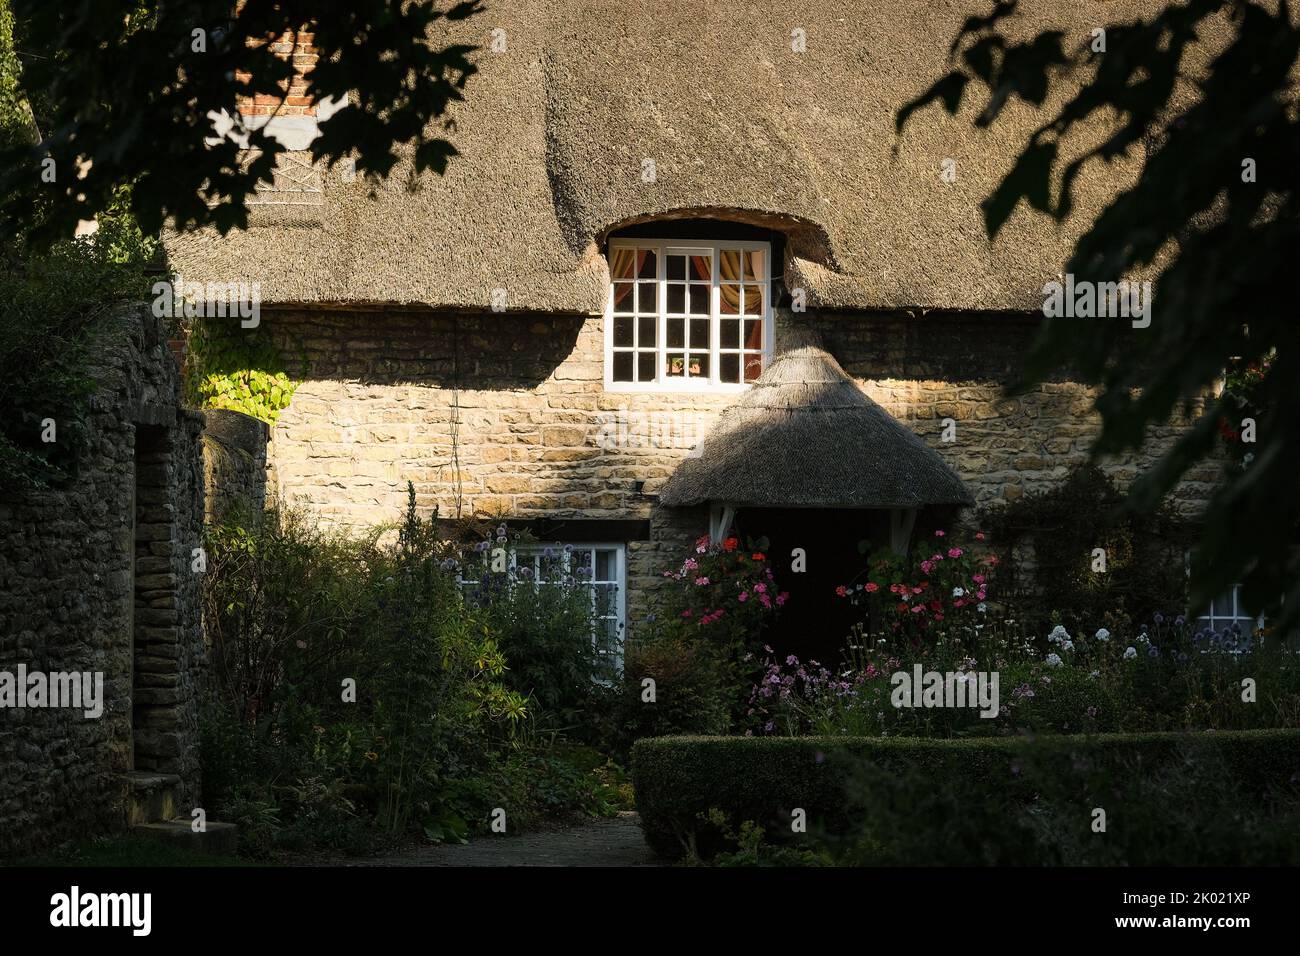 Thornton-le-Dale, North Yorkshire, UK. Pretty Thatched Cottage Stock Photo